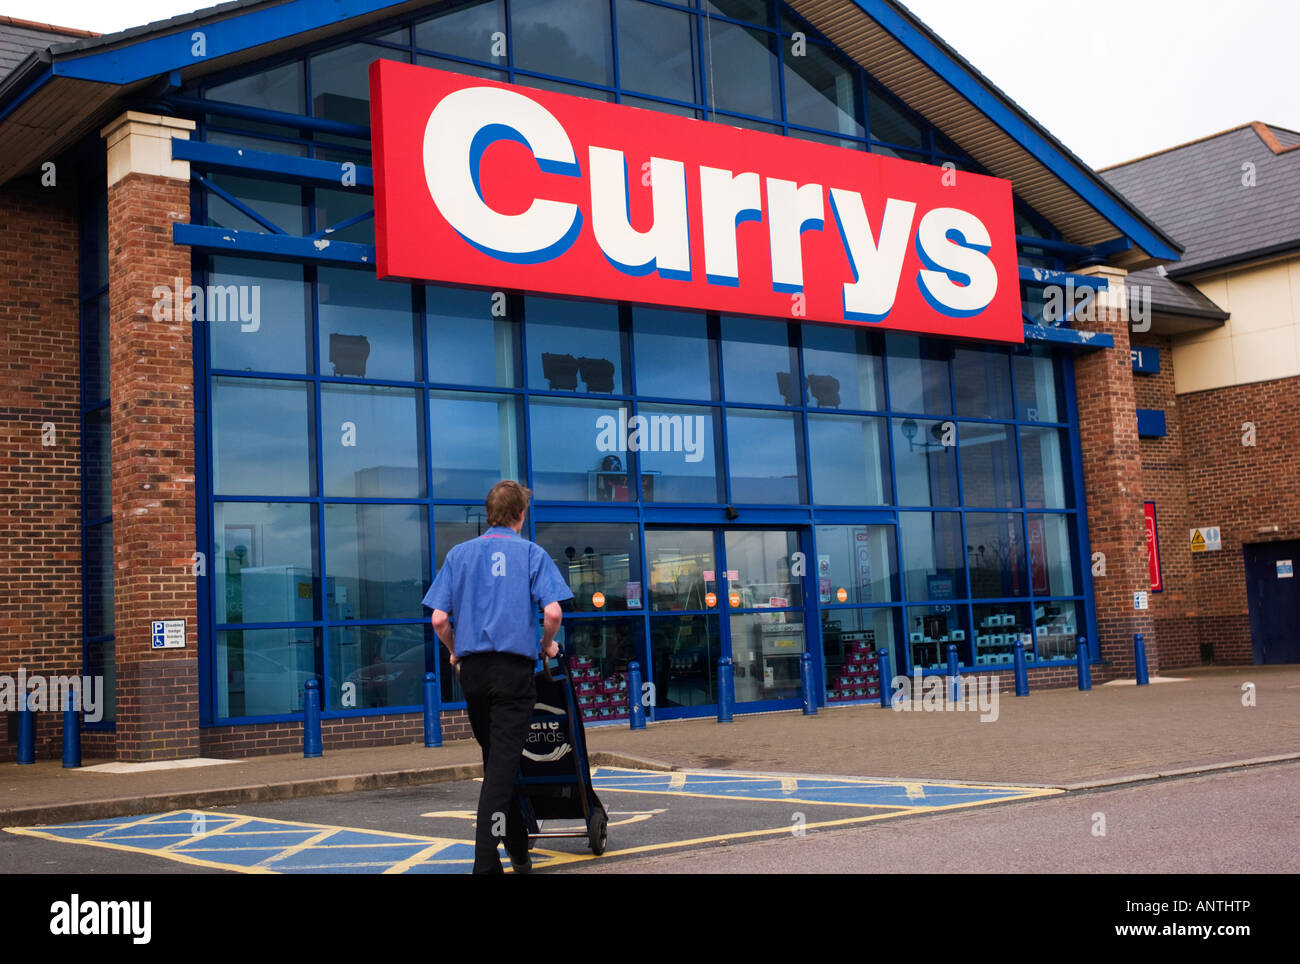 Currys electrical consumer goods store glass exterior facade with employee walking towards the shop. Aberystwyth Wales UK Stock Photo